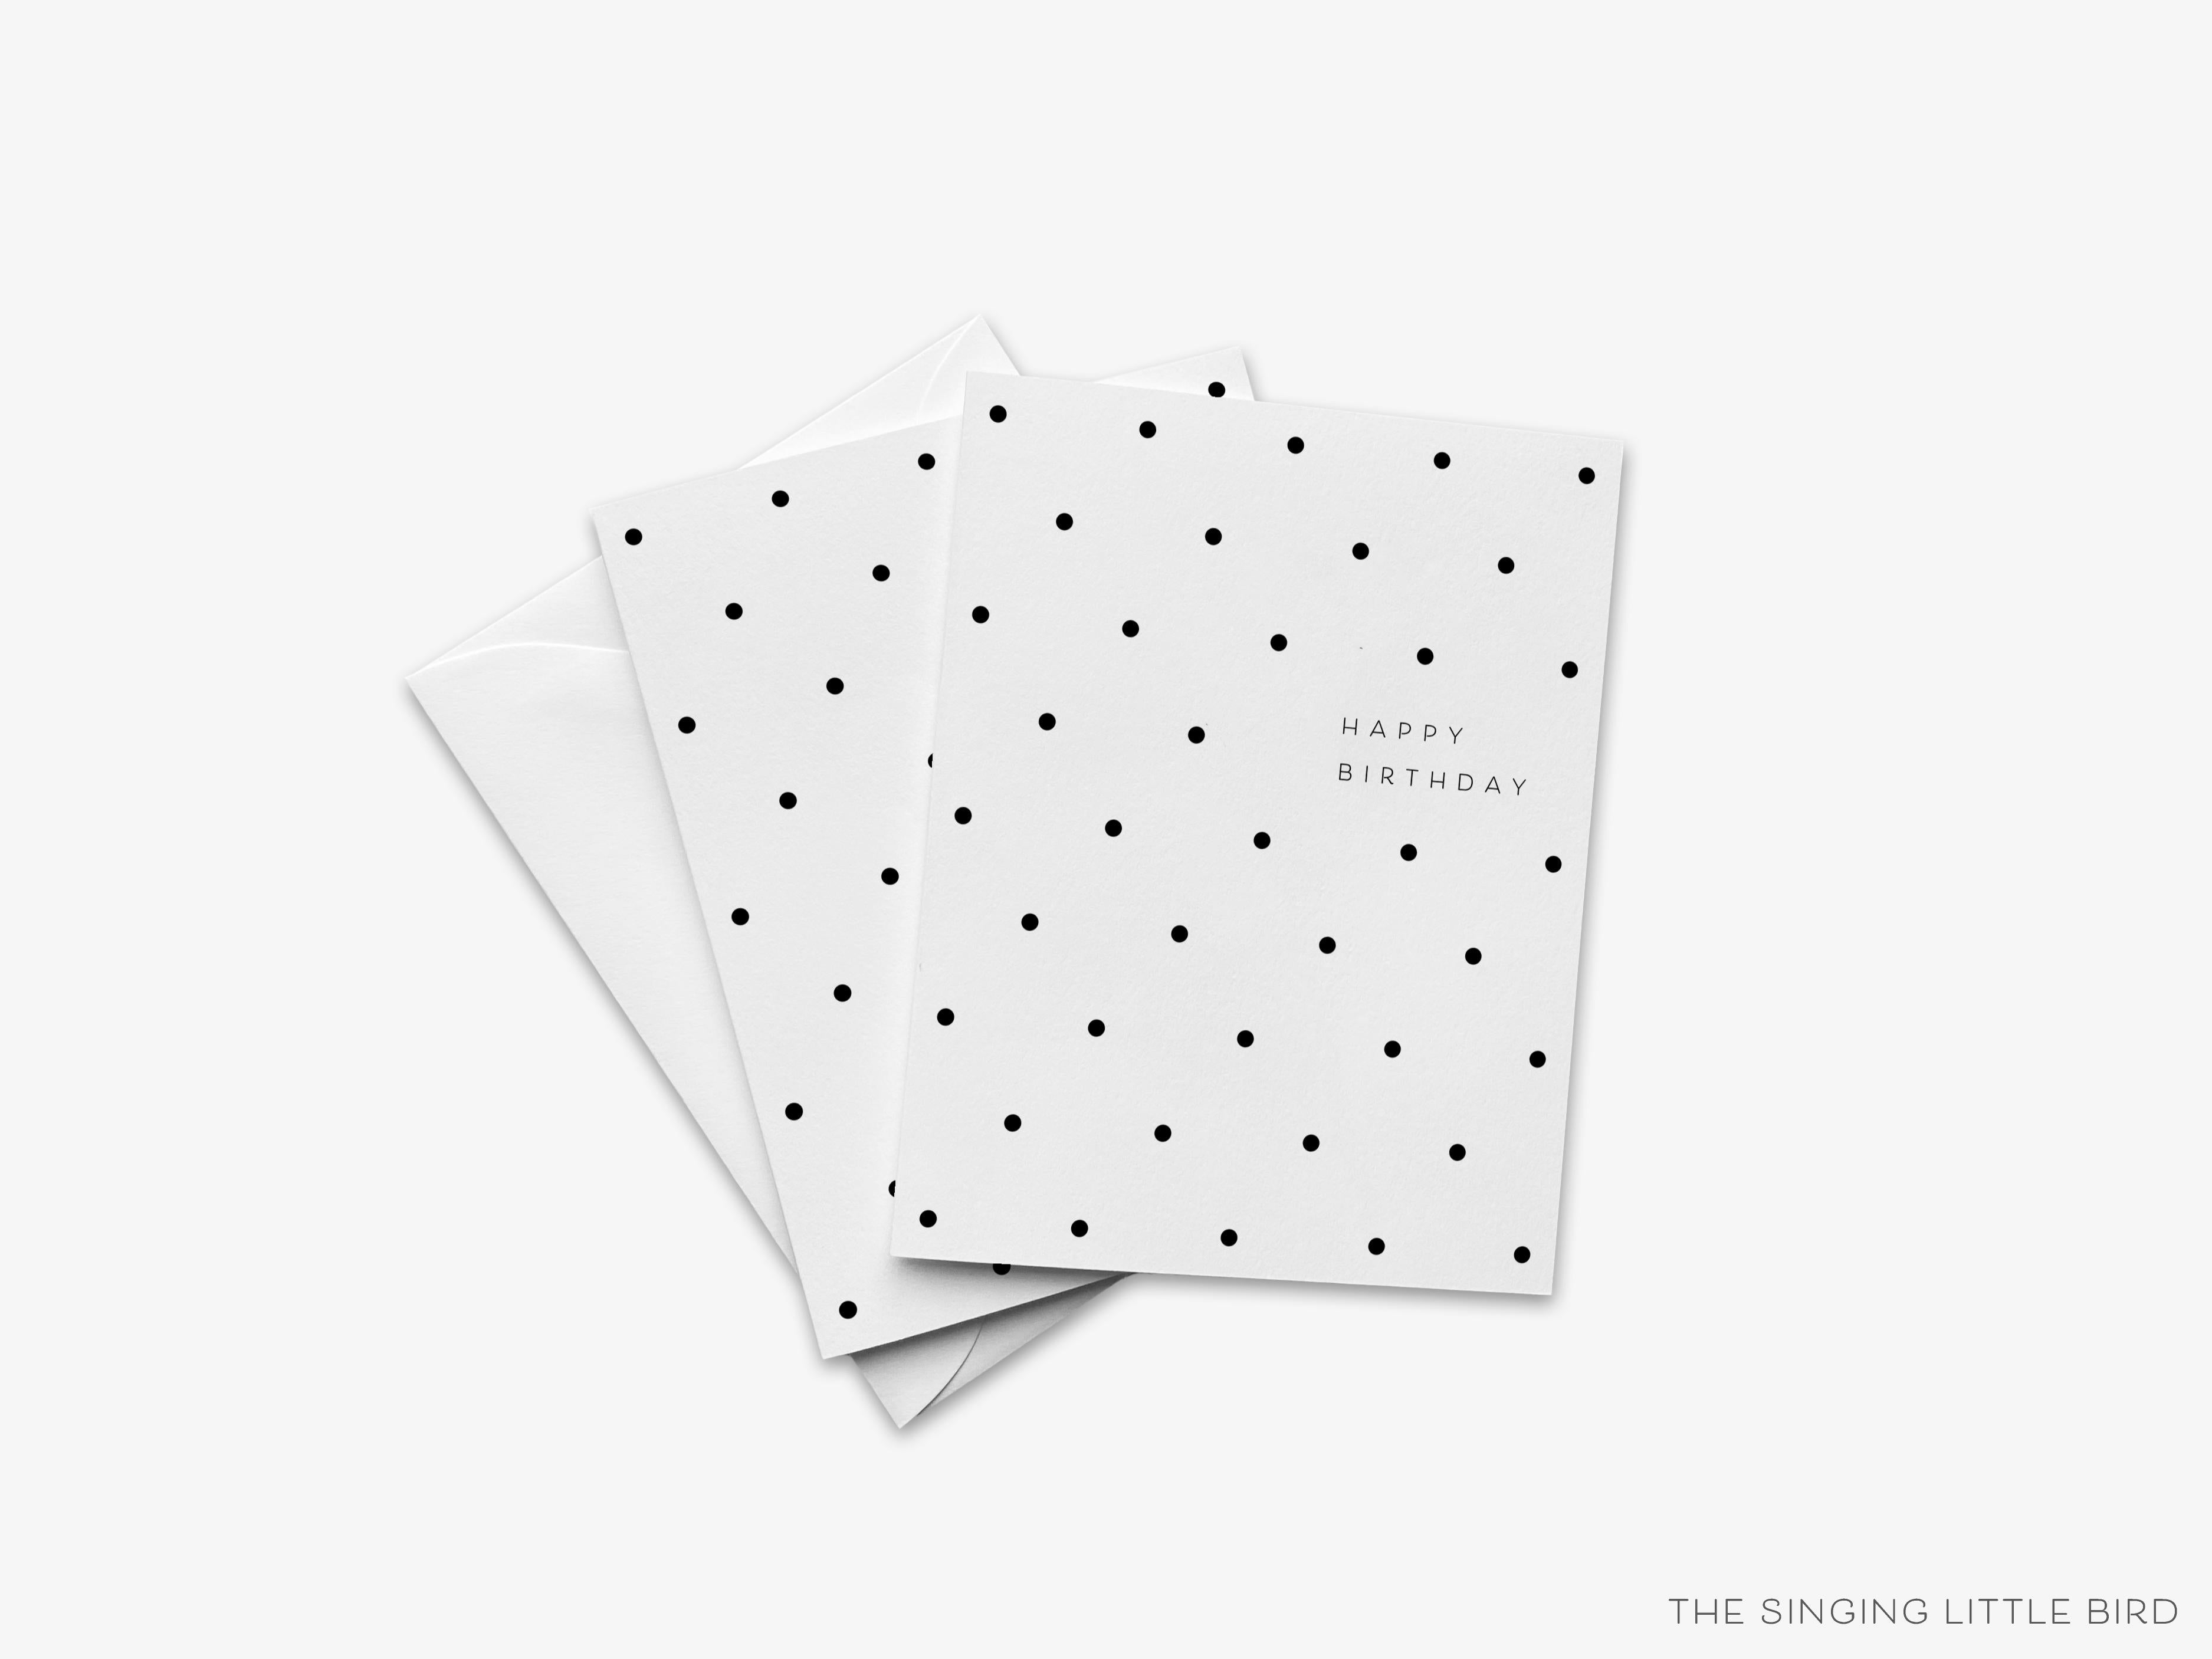 Polka Dot Happy Birthday Card-These folded greeting cards are 4.25x5.5 and feature our hand-painted polka dots, printed in the USA on 100lb textured stock. They come with a White envelope and make a great birthday card for the black and white chic lover in your life.-The Singing Little Bird